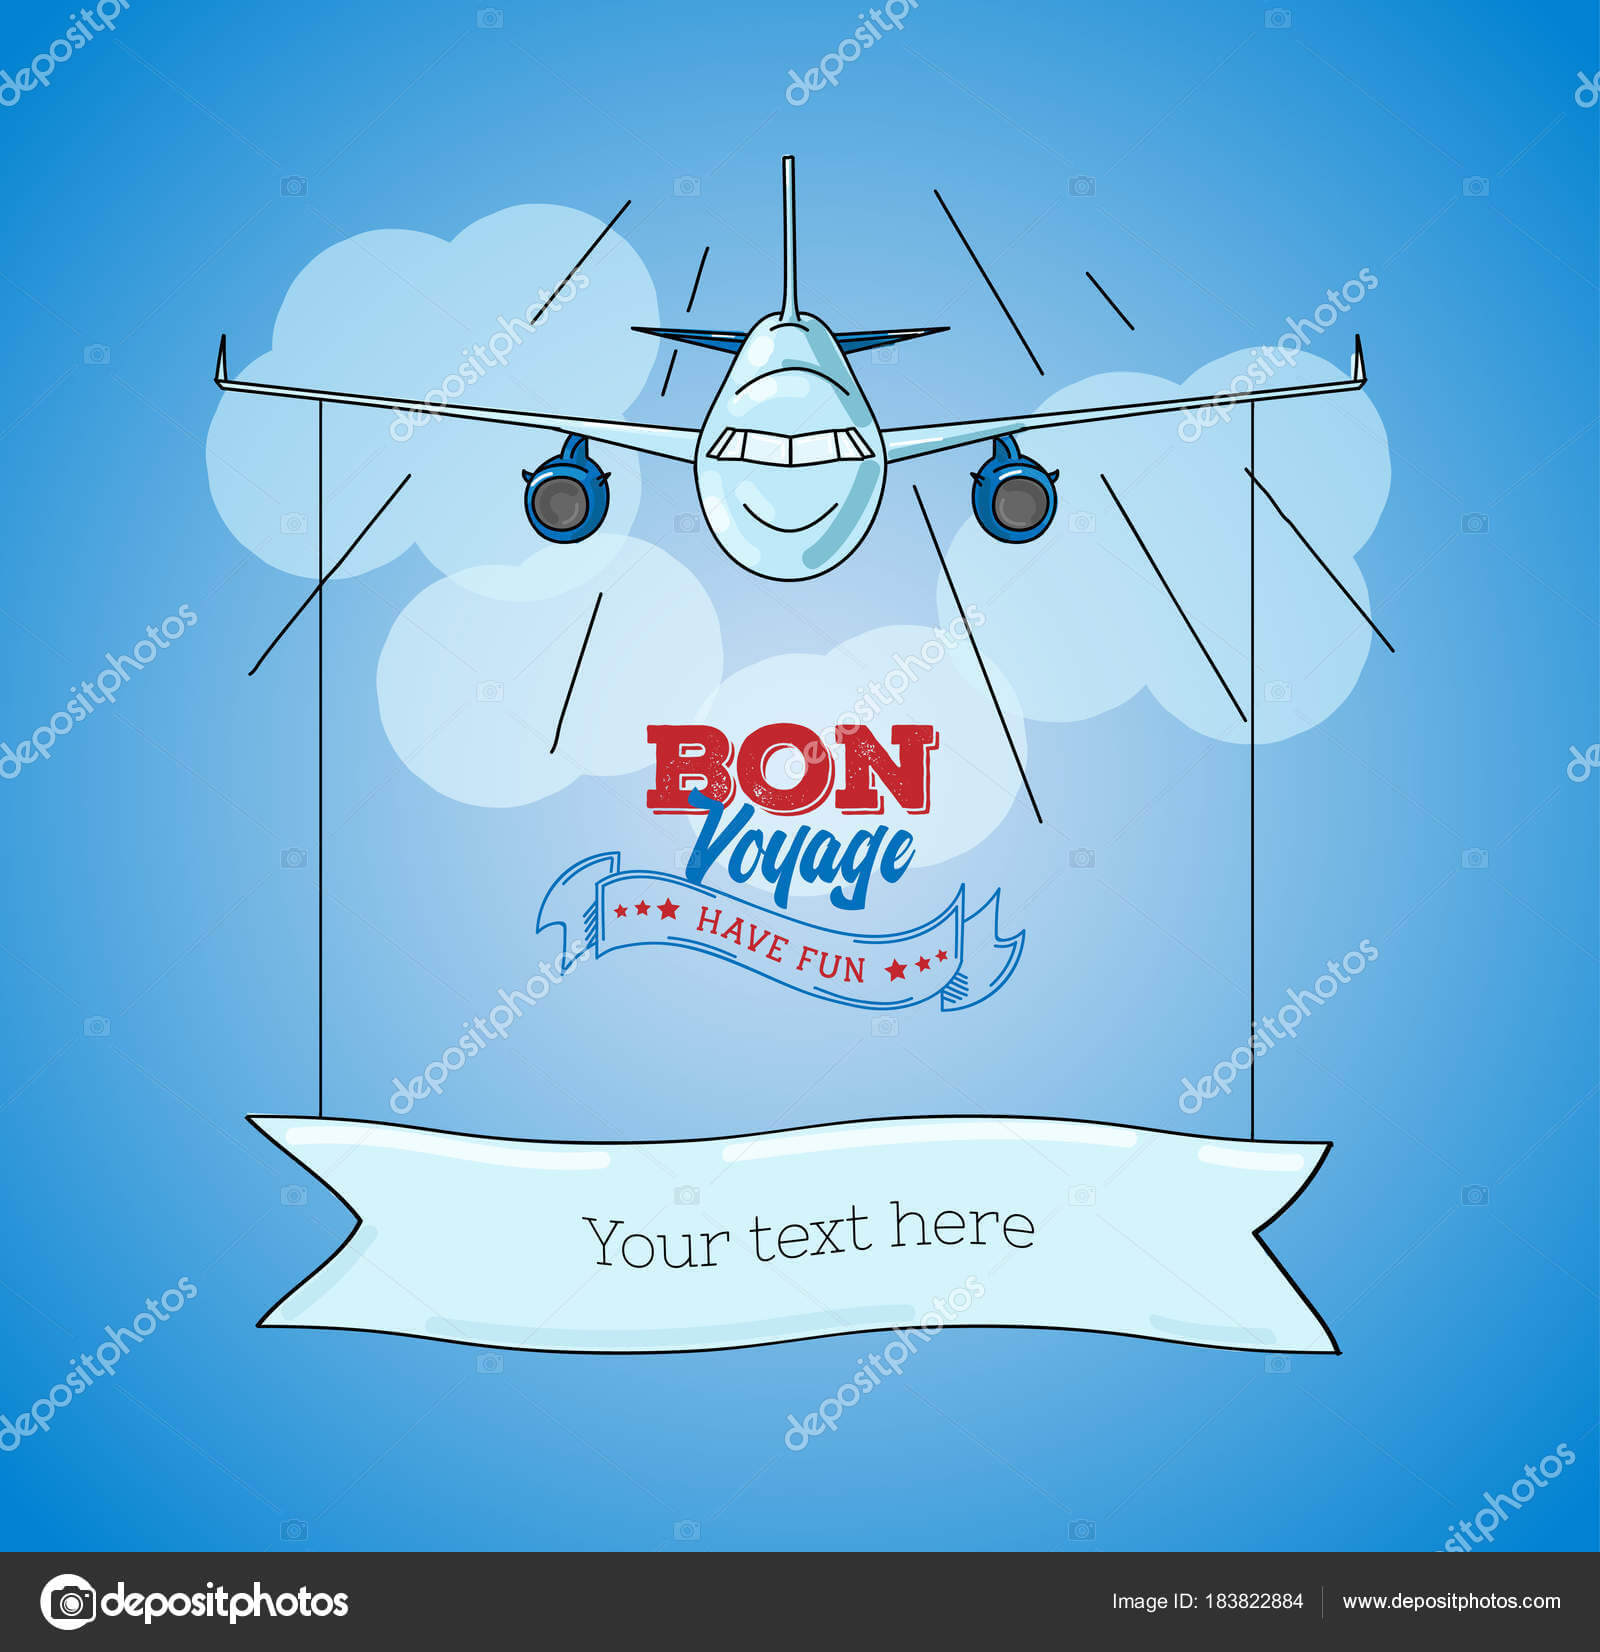 Card Template With Plane Graphic Illustration On Blue Sky With Bon Voyage Card Template